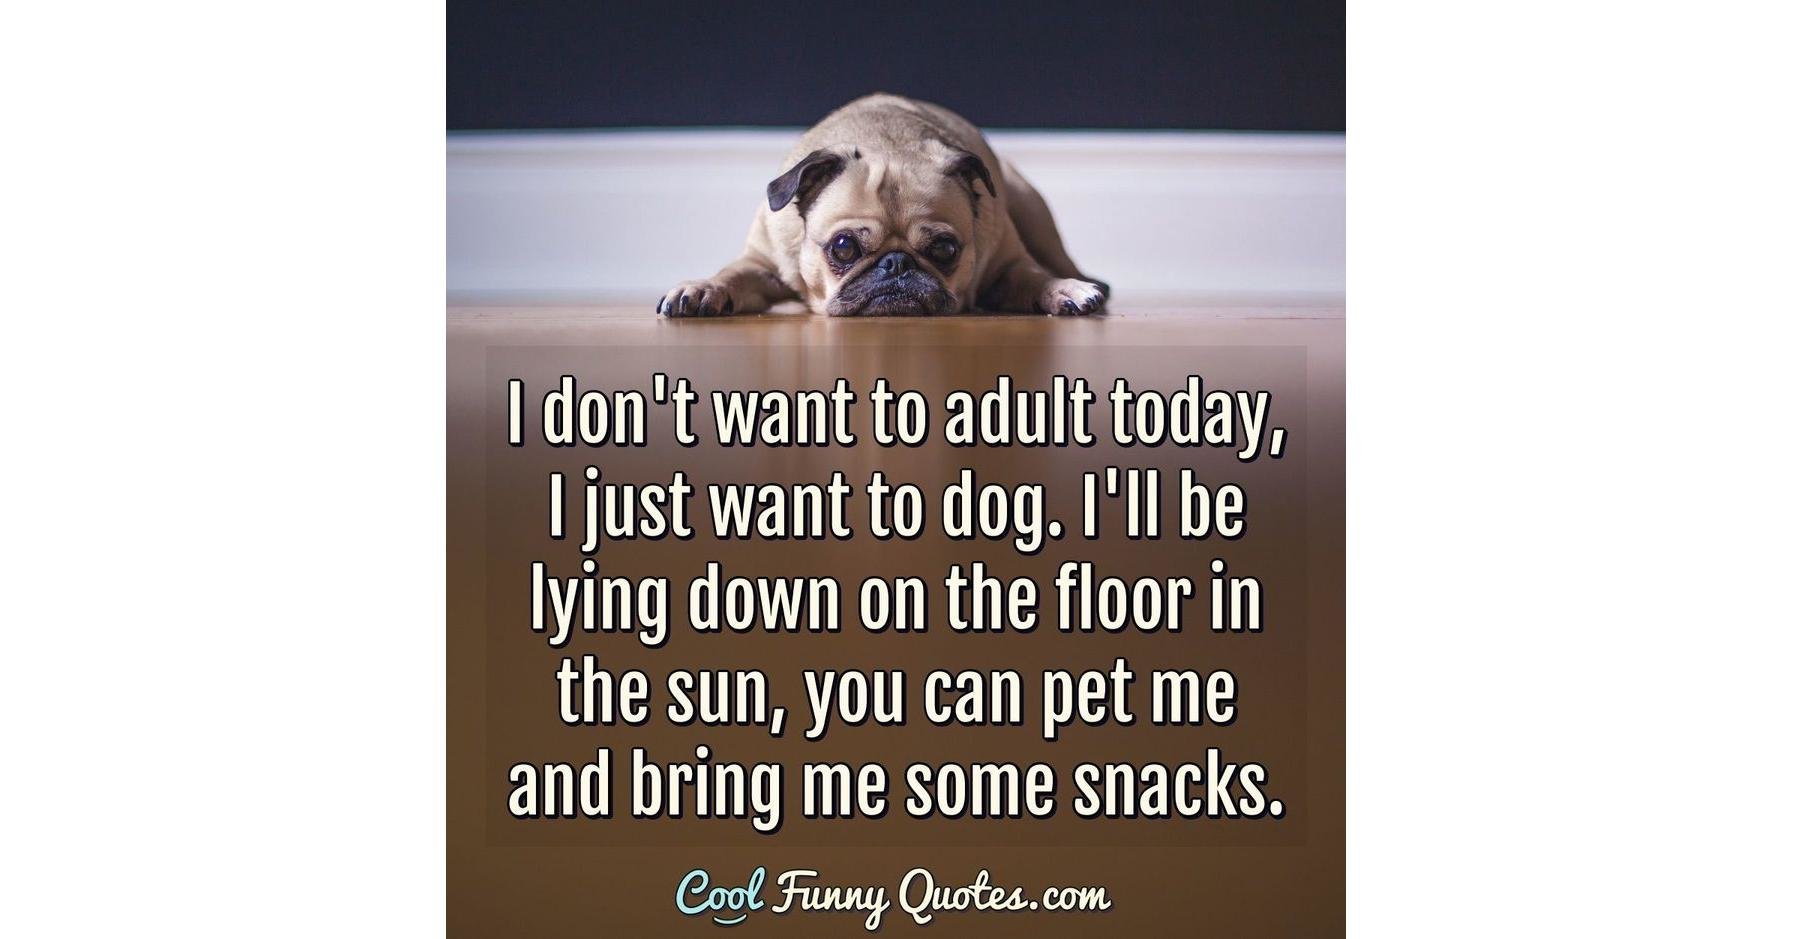 I don't want to adult today, I just want to dog. I'll be lying down on